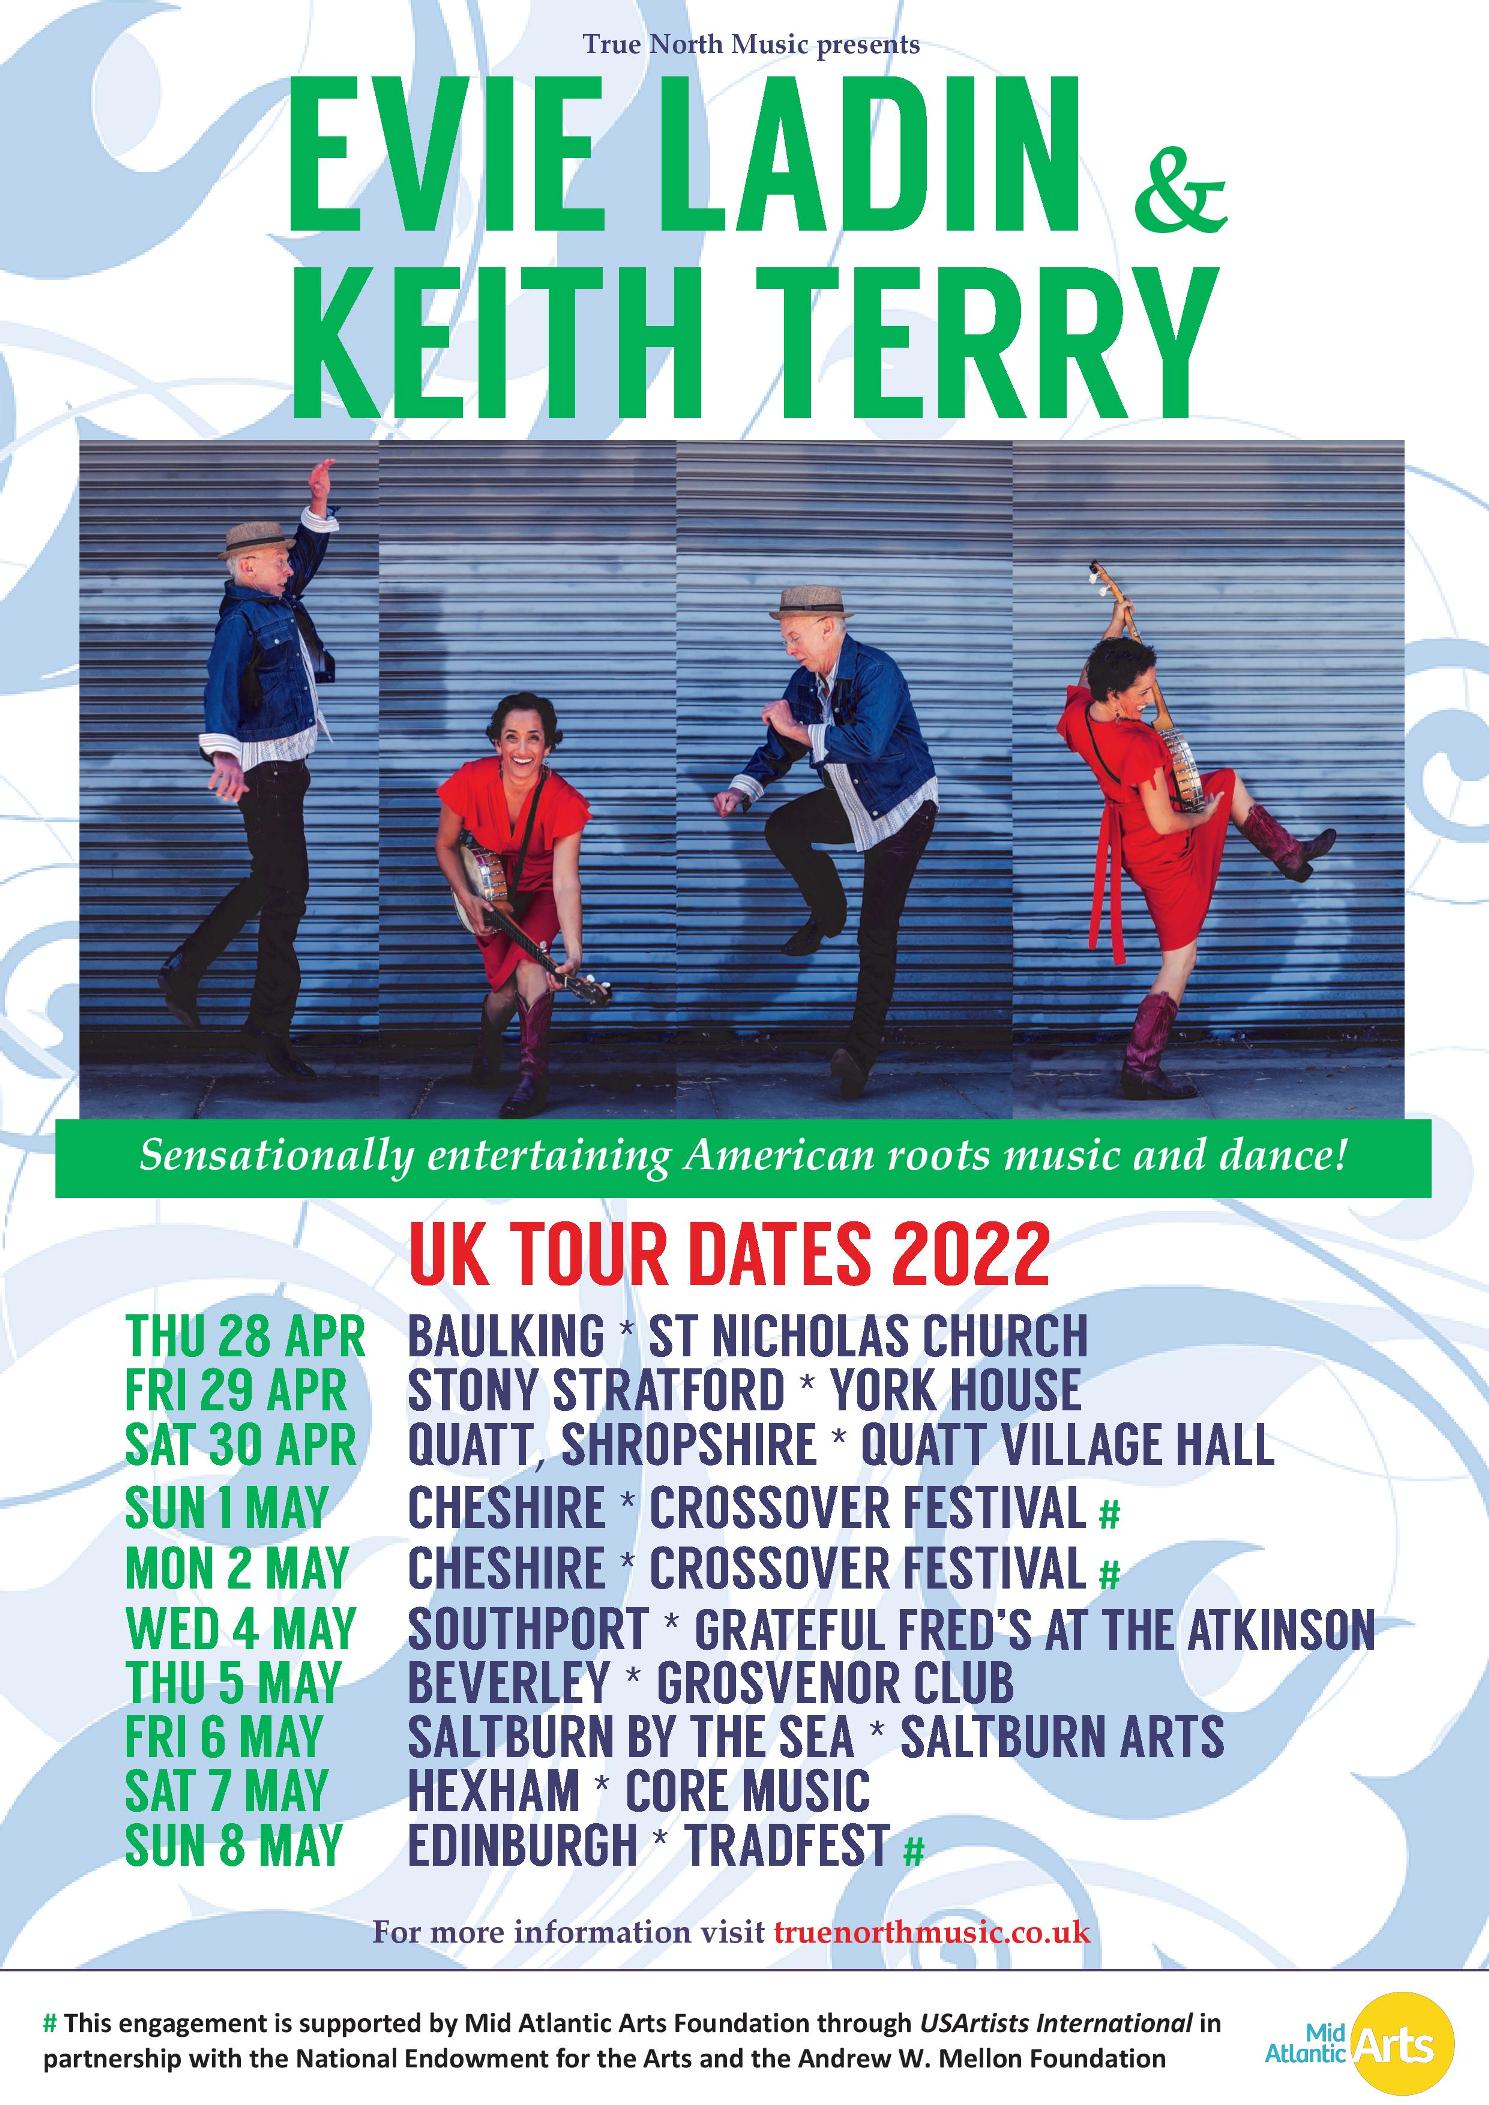 Evie Ladin & Keith Terry on tour, and at Crossover